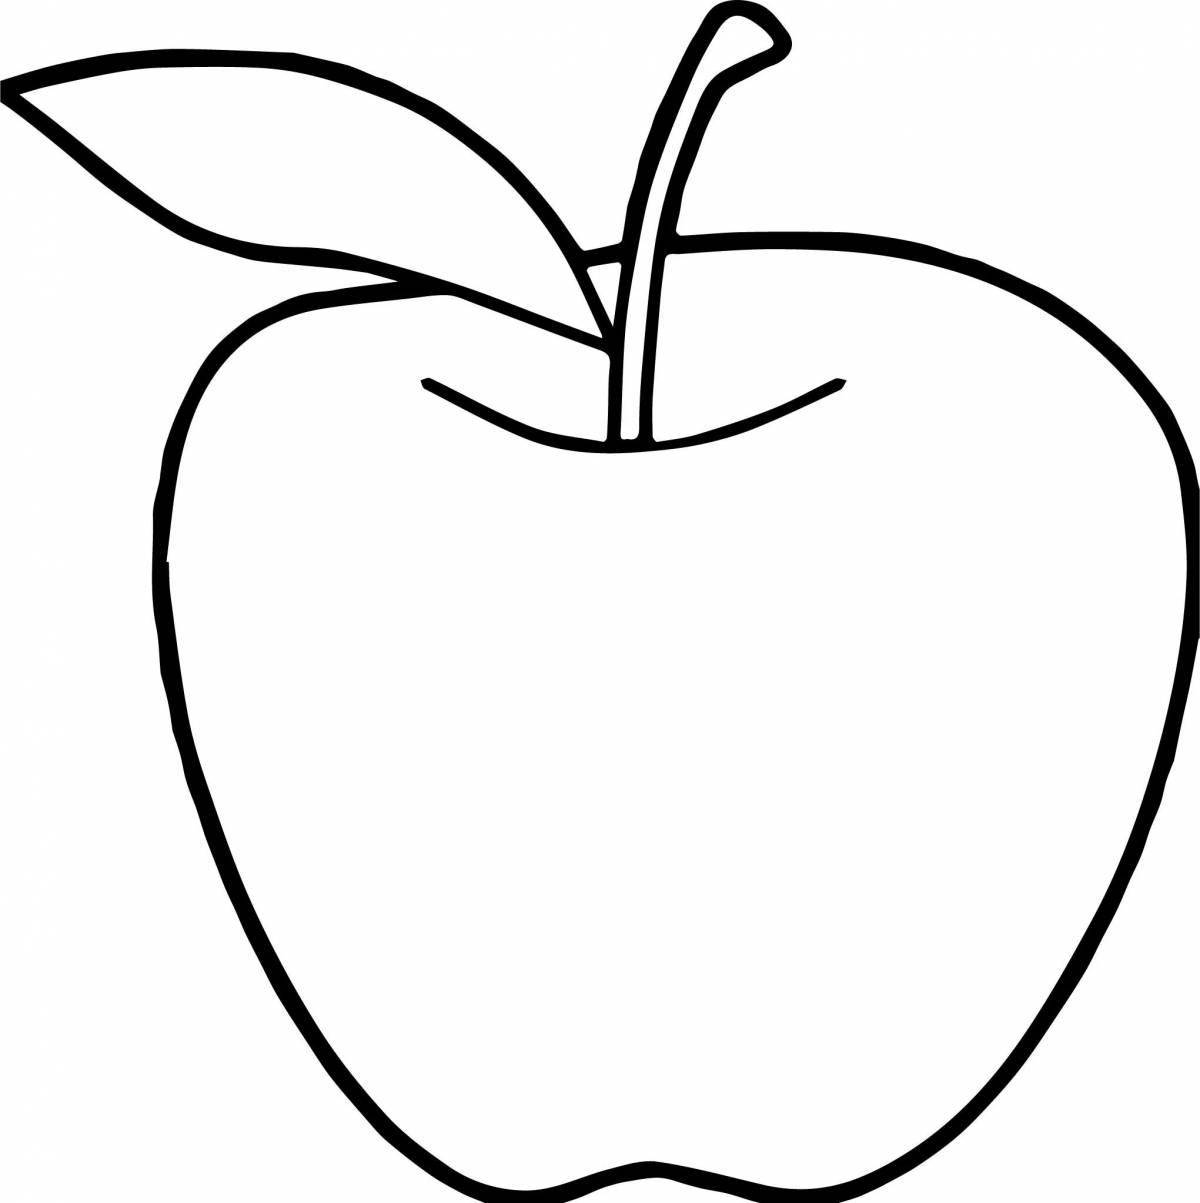 Playful apple pear coloring page